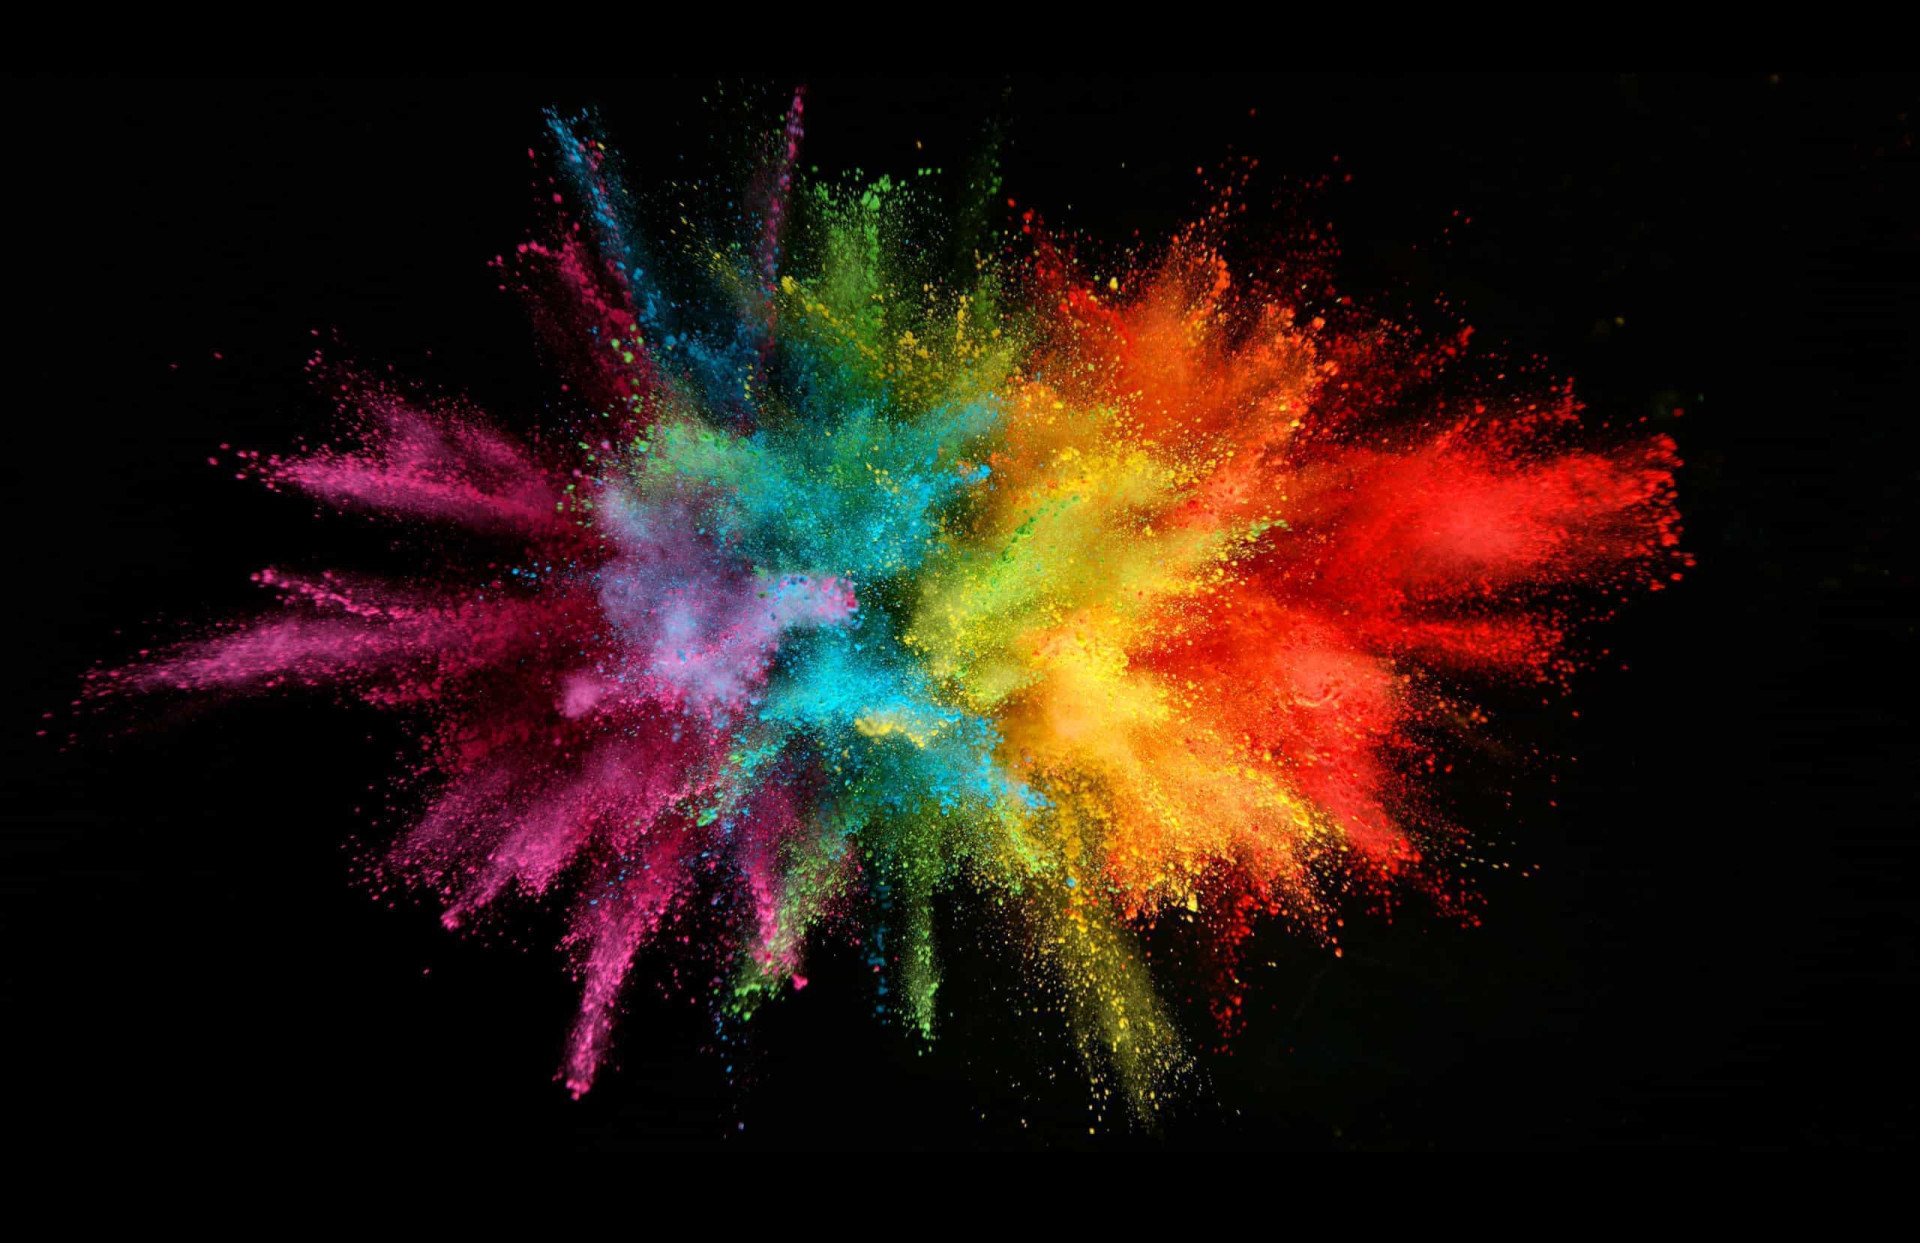 How colors affect our mood and emotions